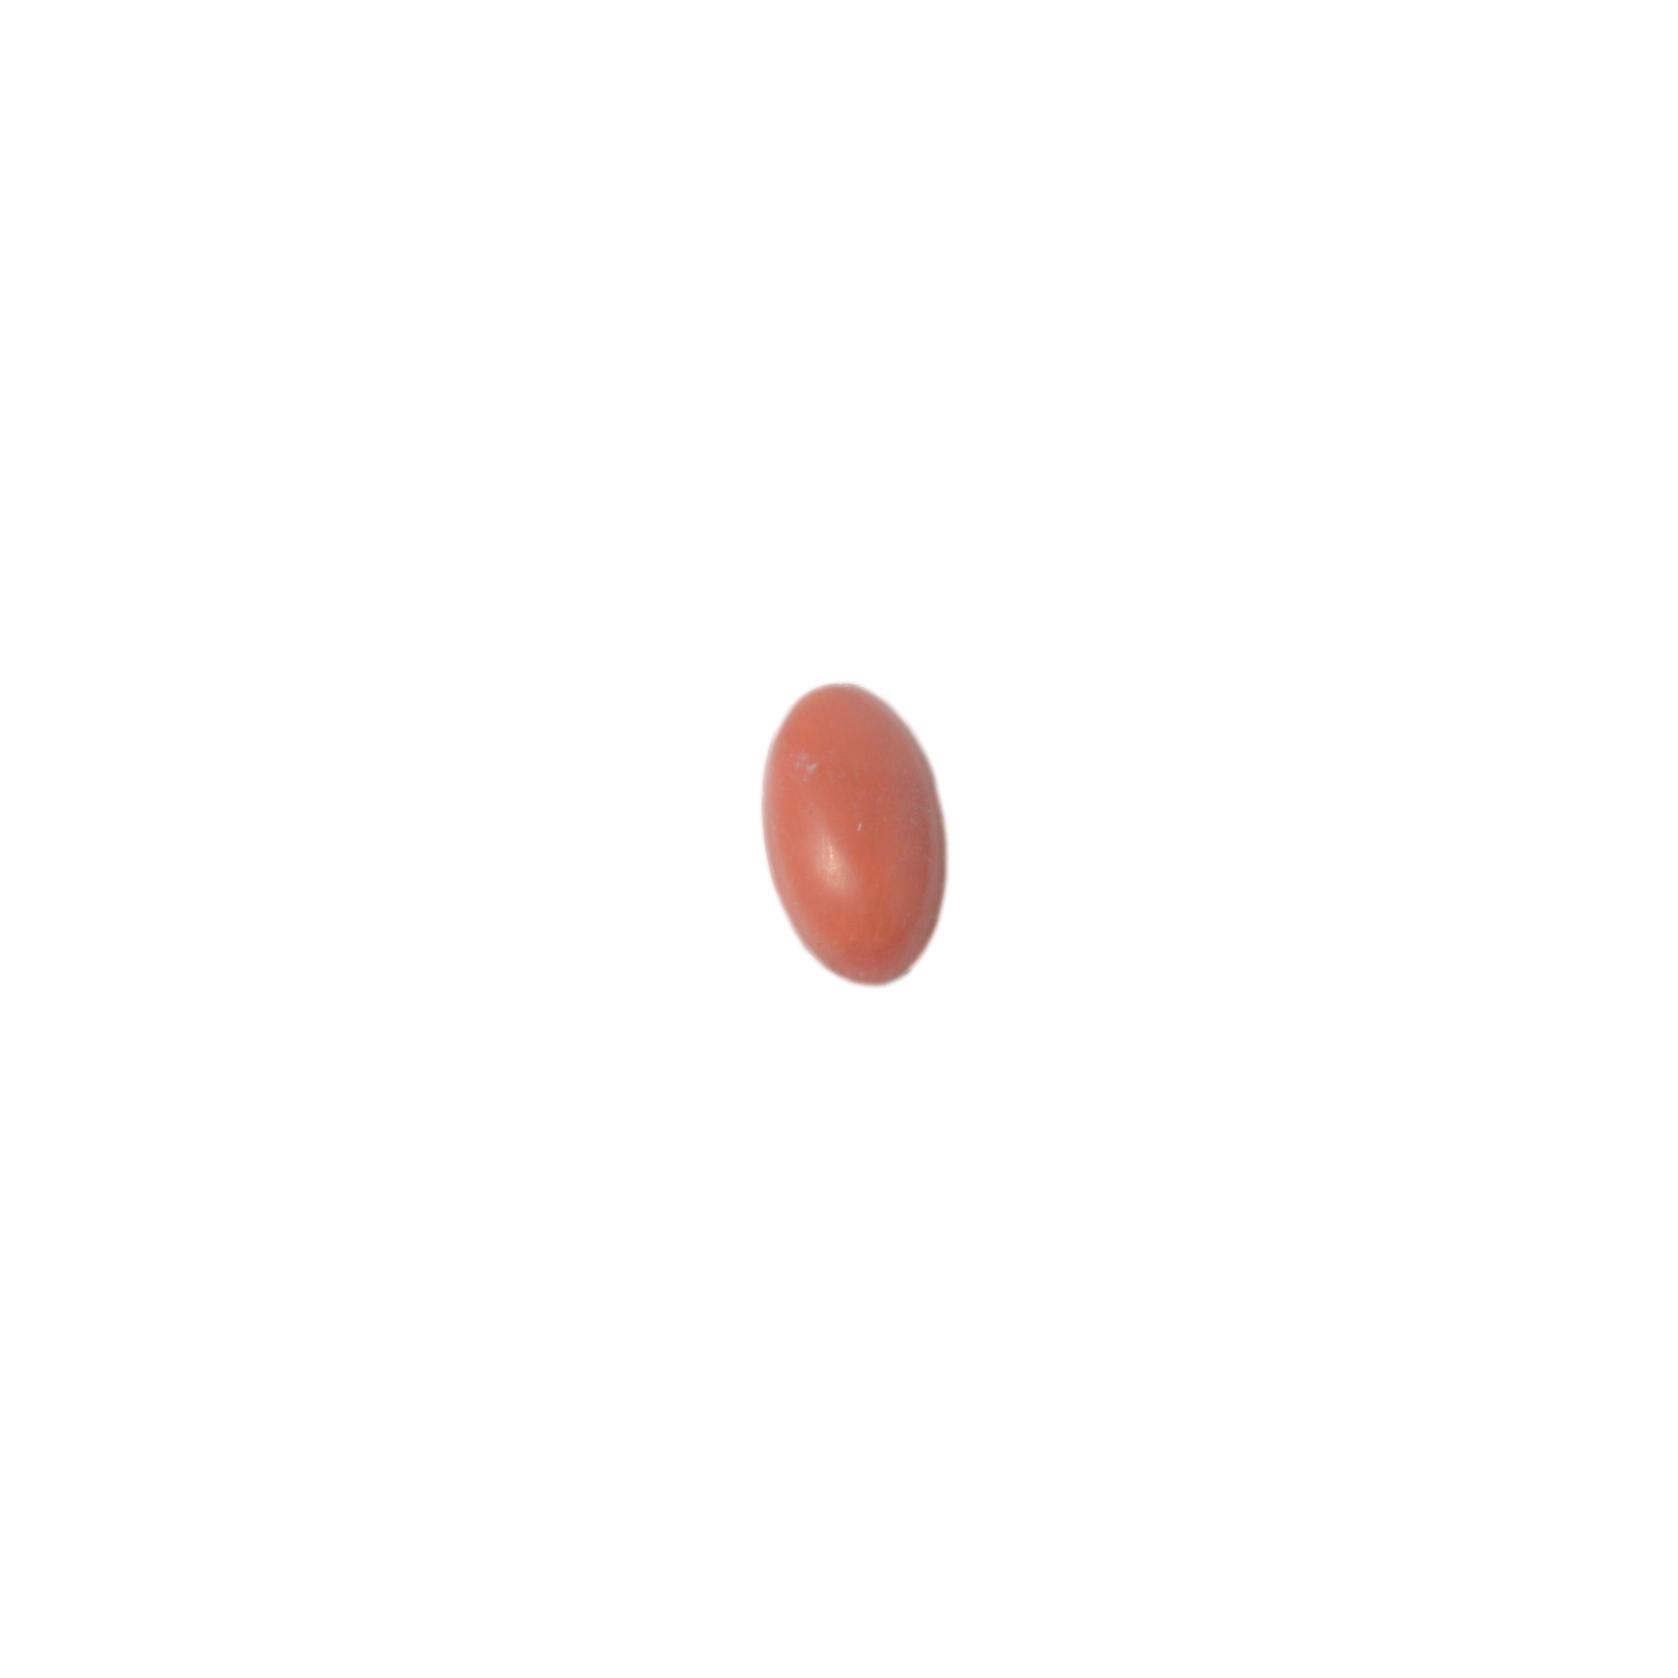 CORAL-4.65CT,PRICE-13950